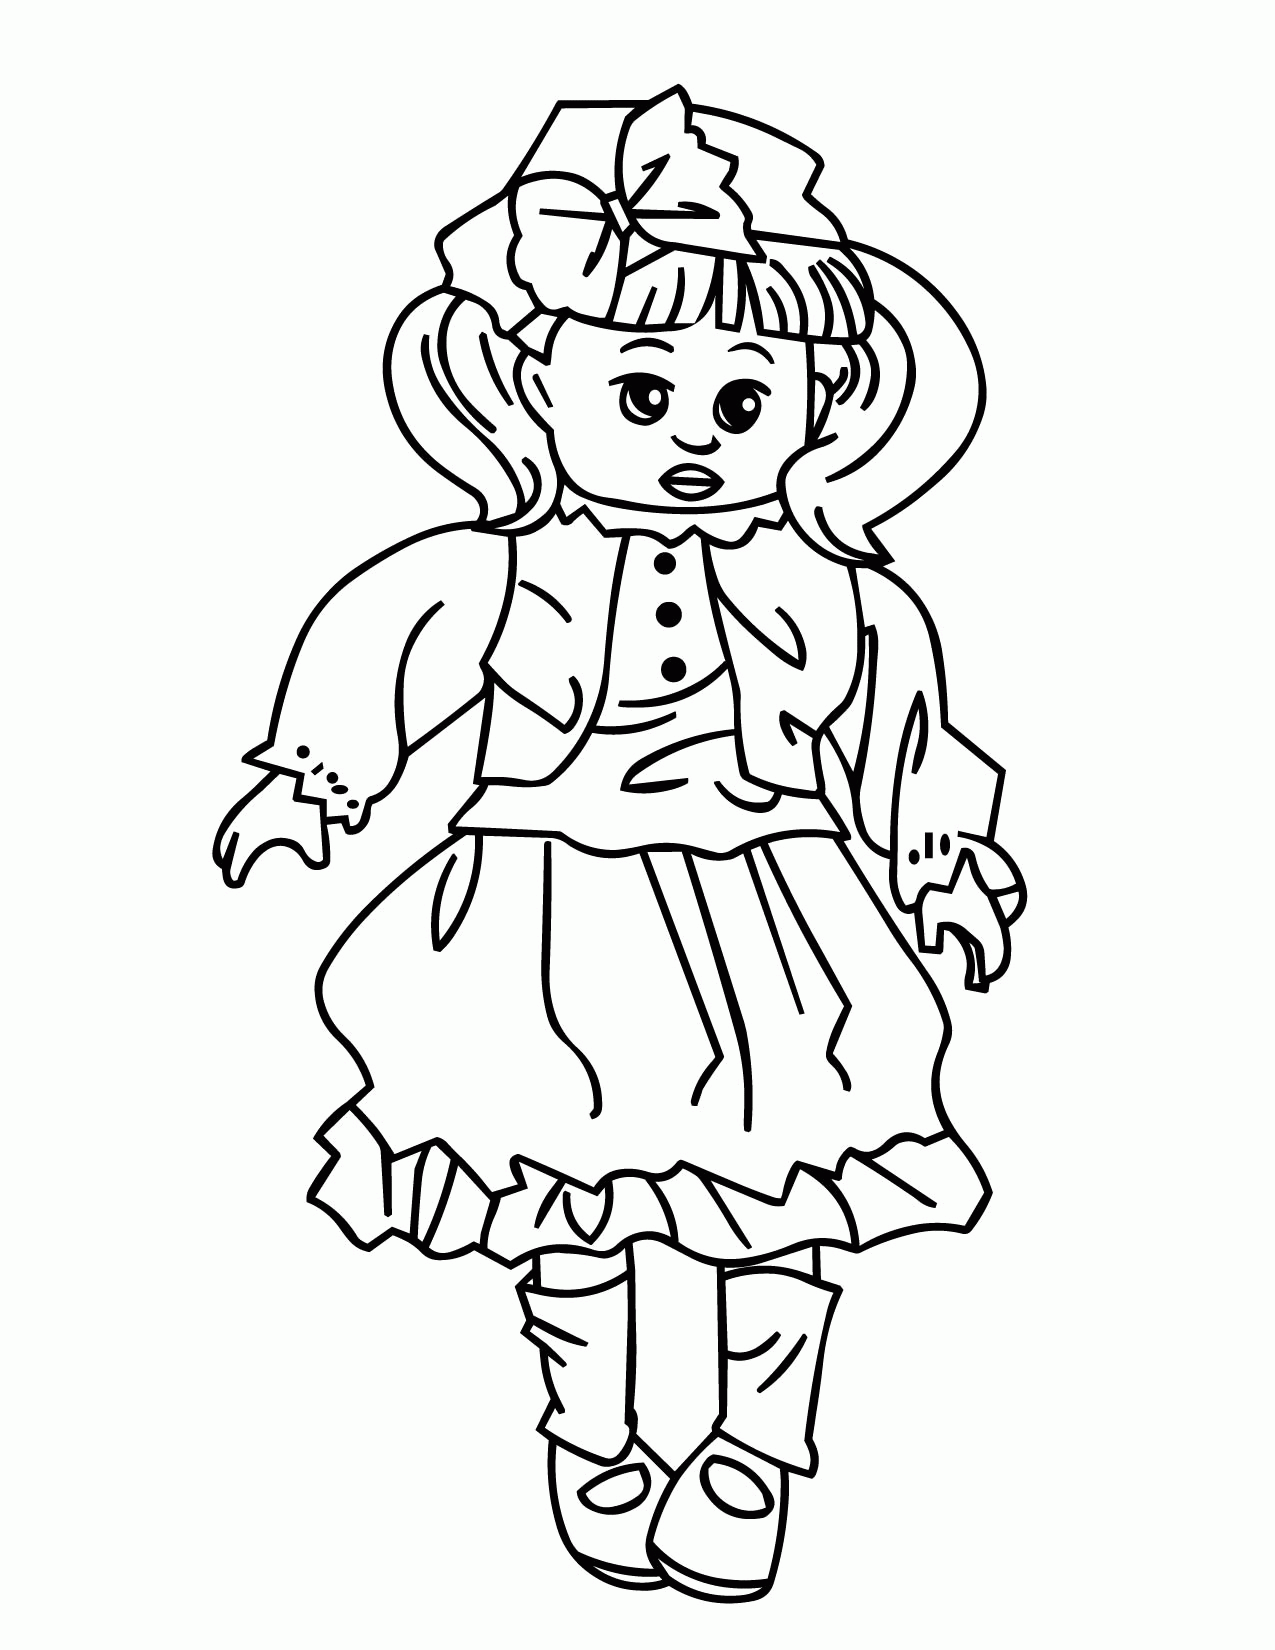 The Doll Place - Coloring Pages for Kids and for Adults